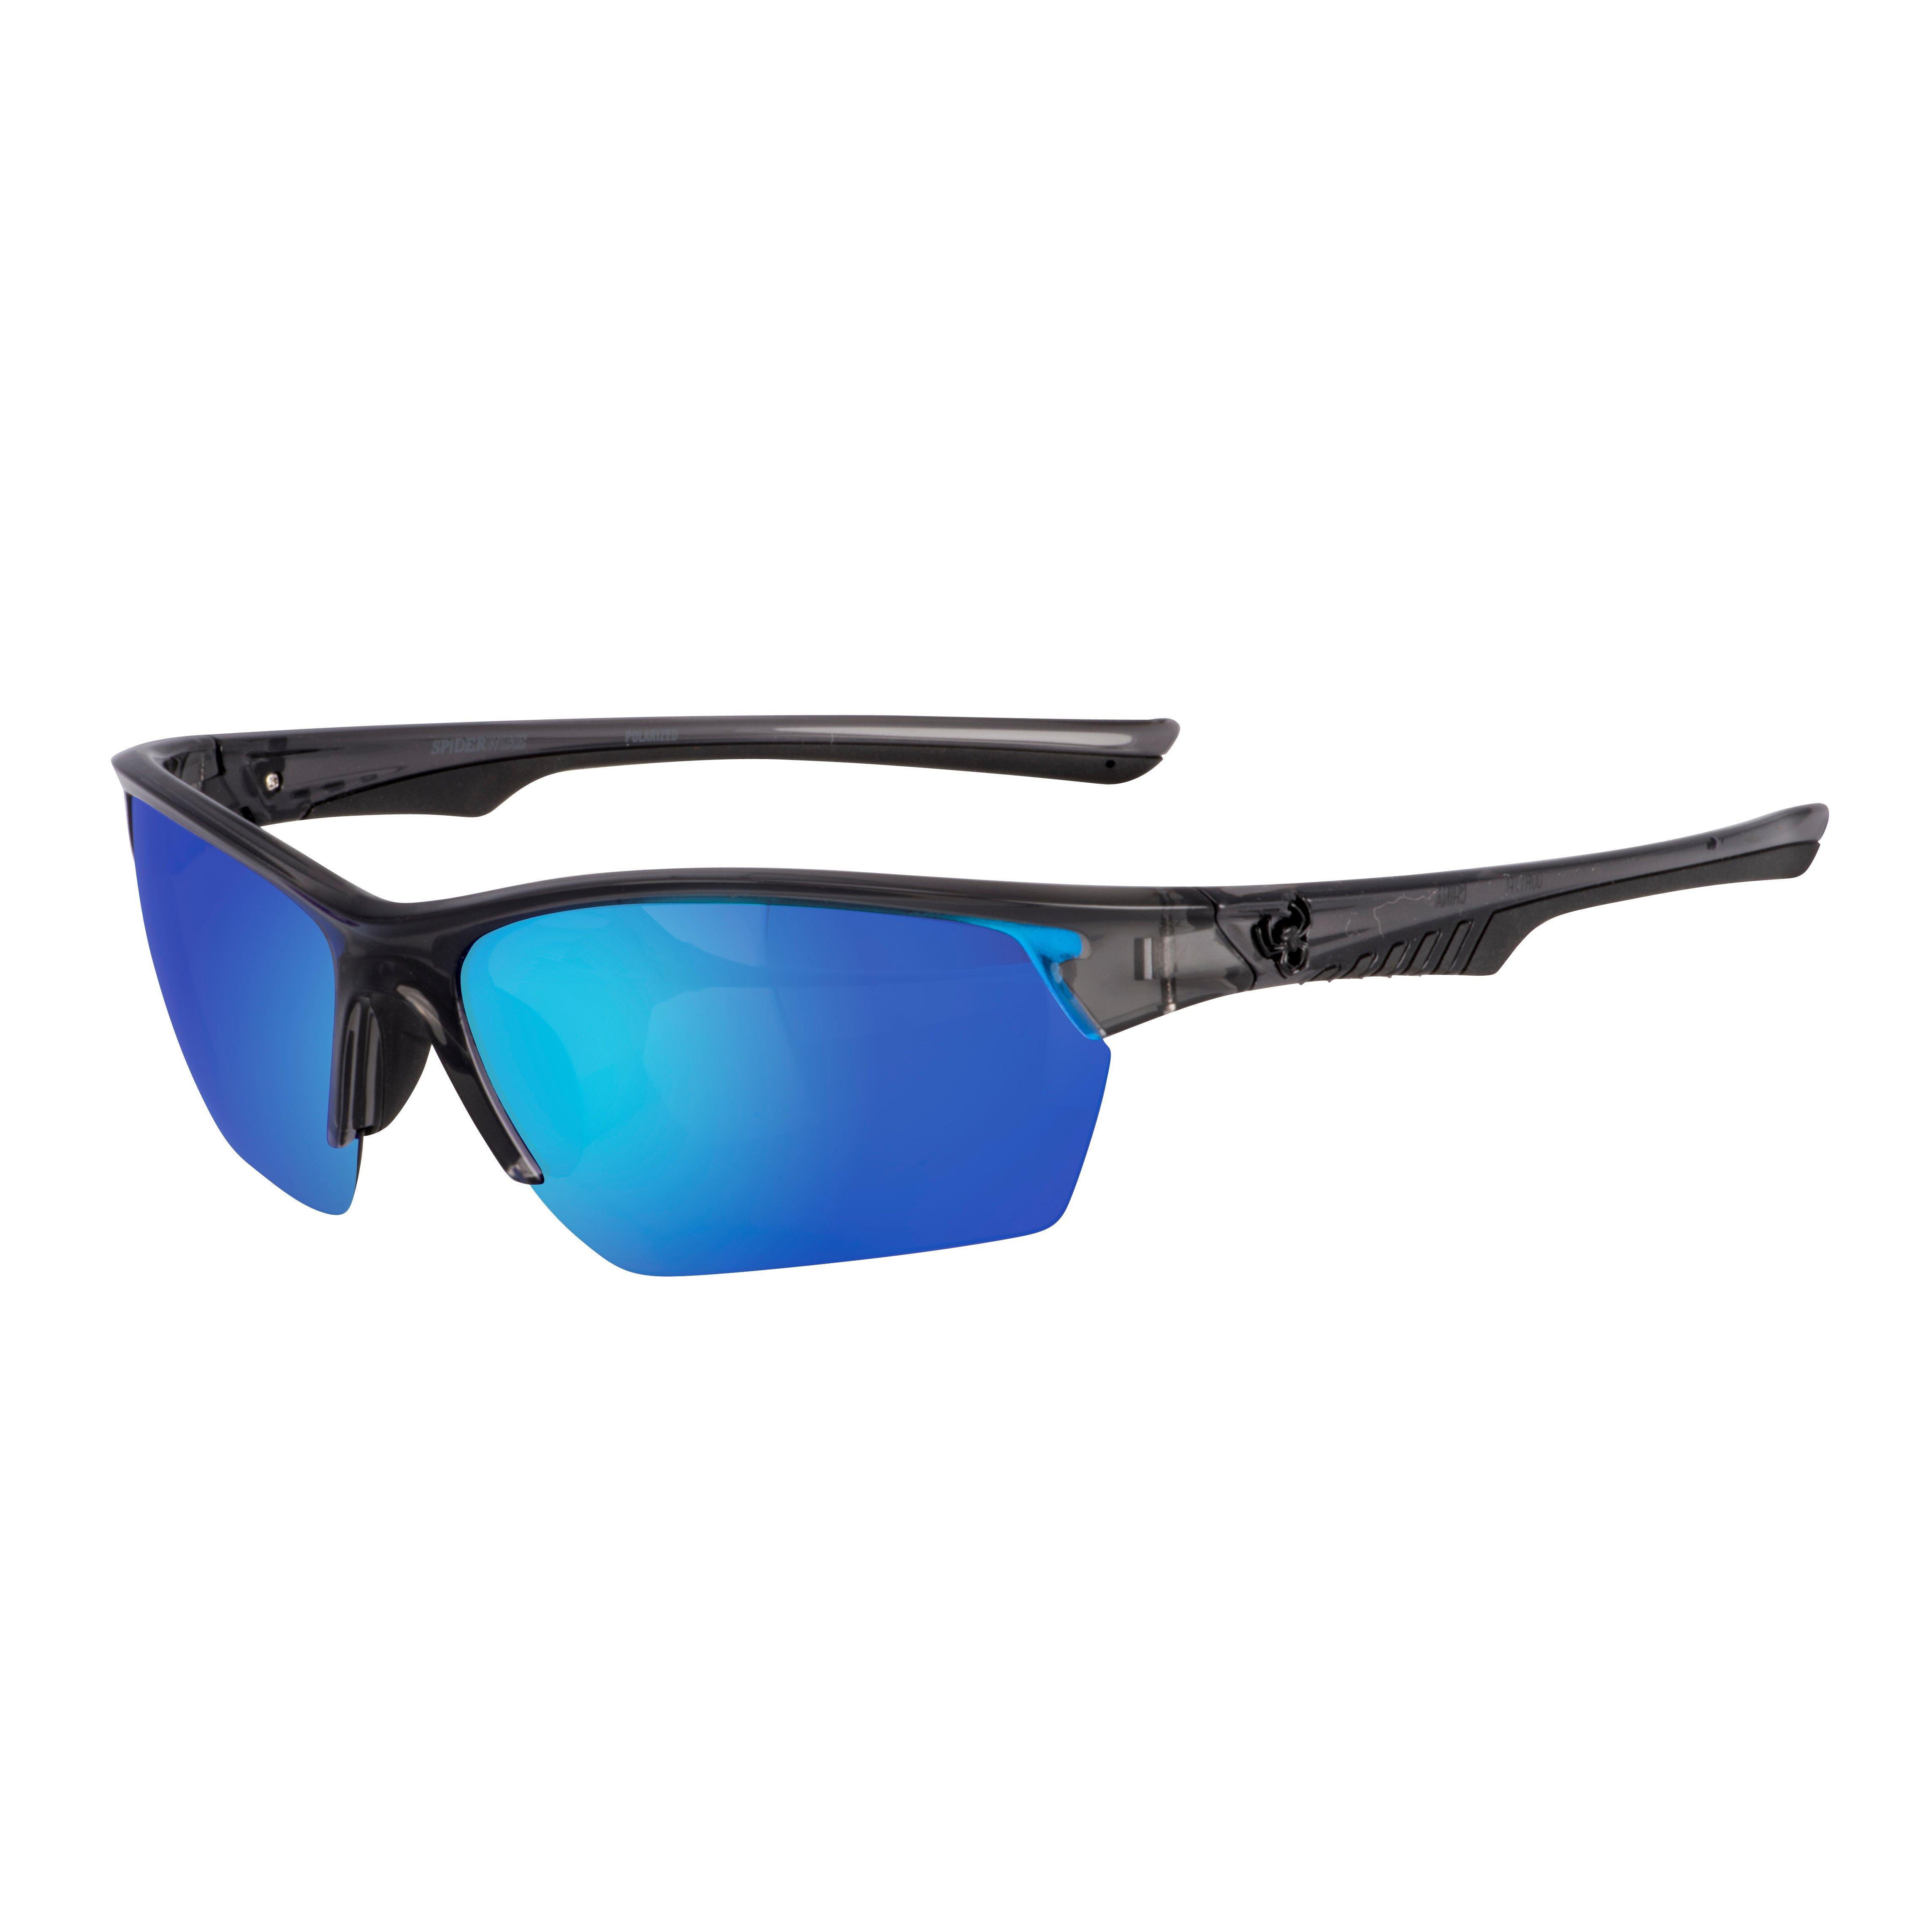 Spiderwire SPW009 Sunglasses , Up to 25% Off — CampSaver